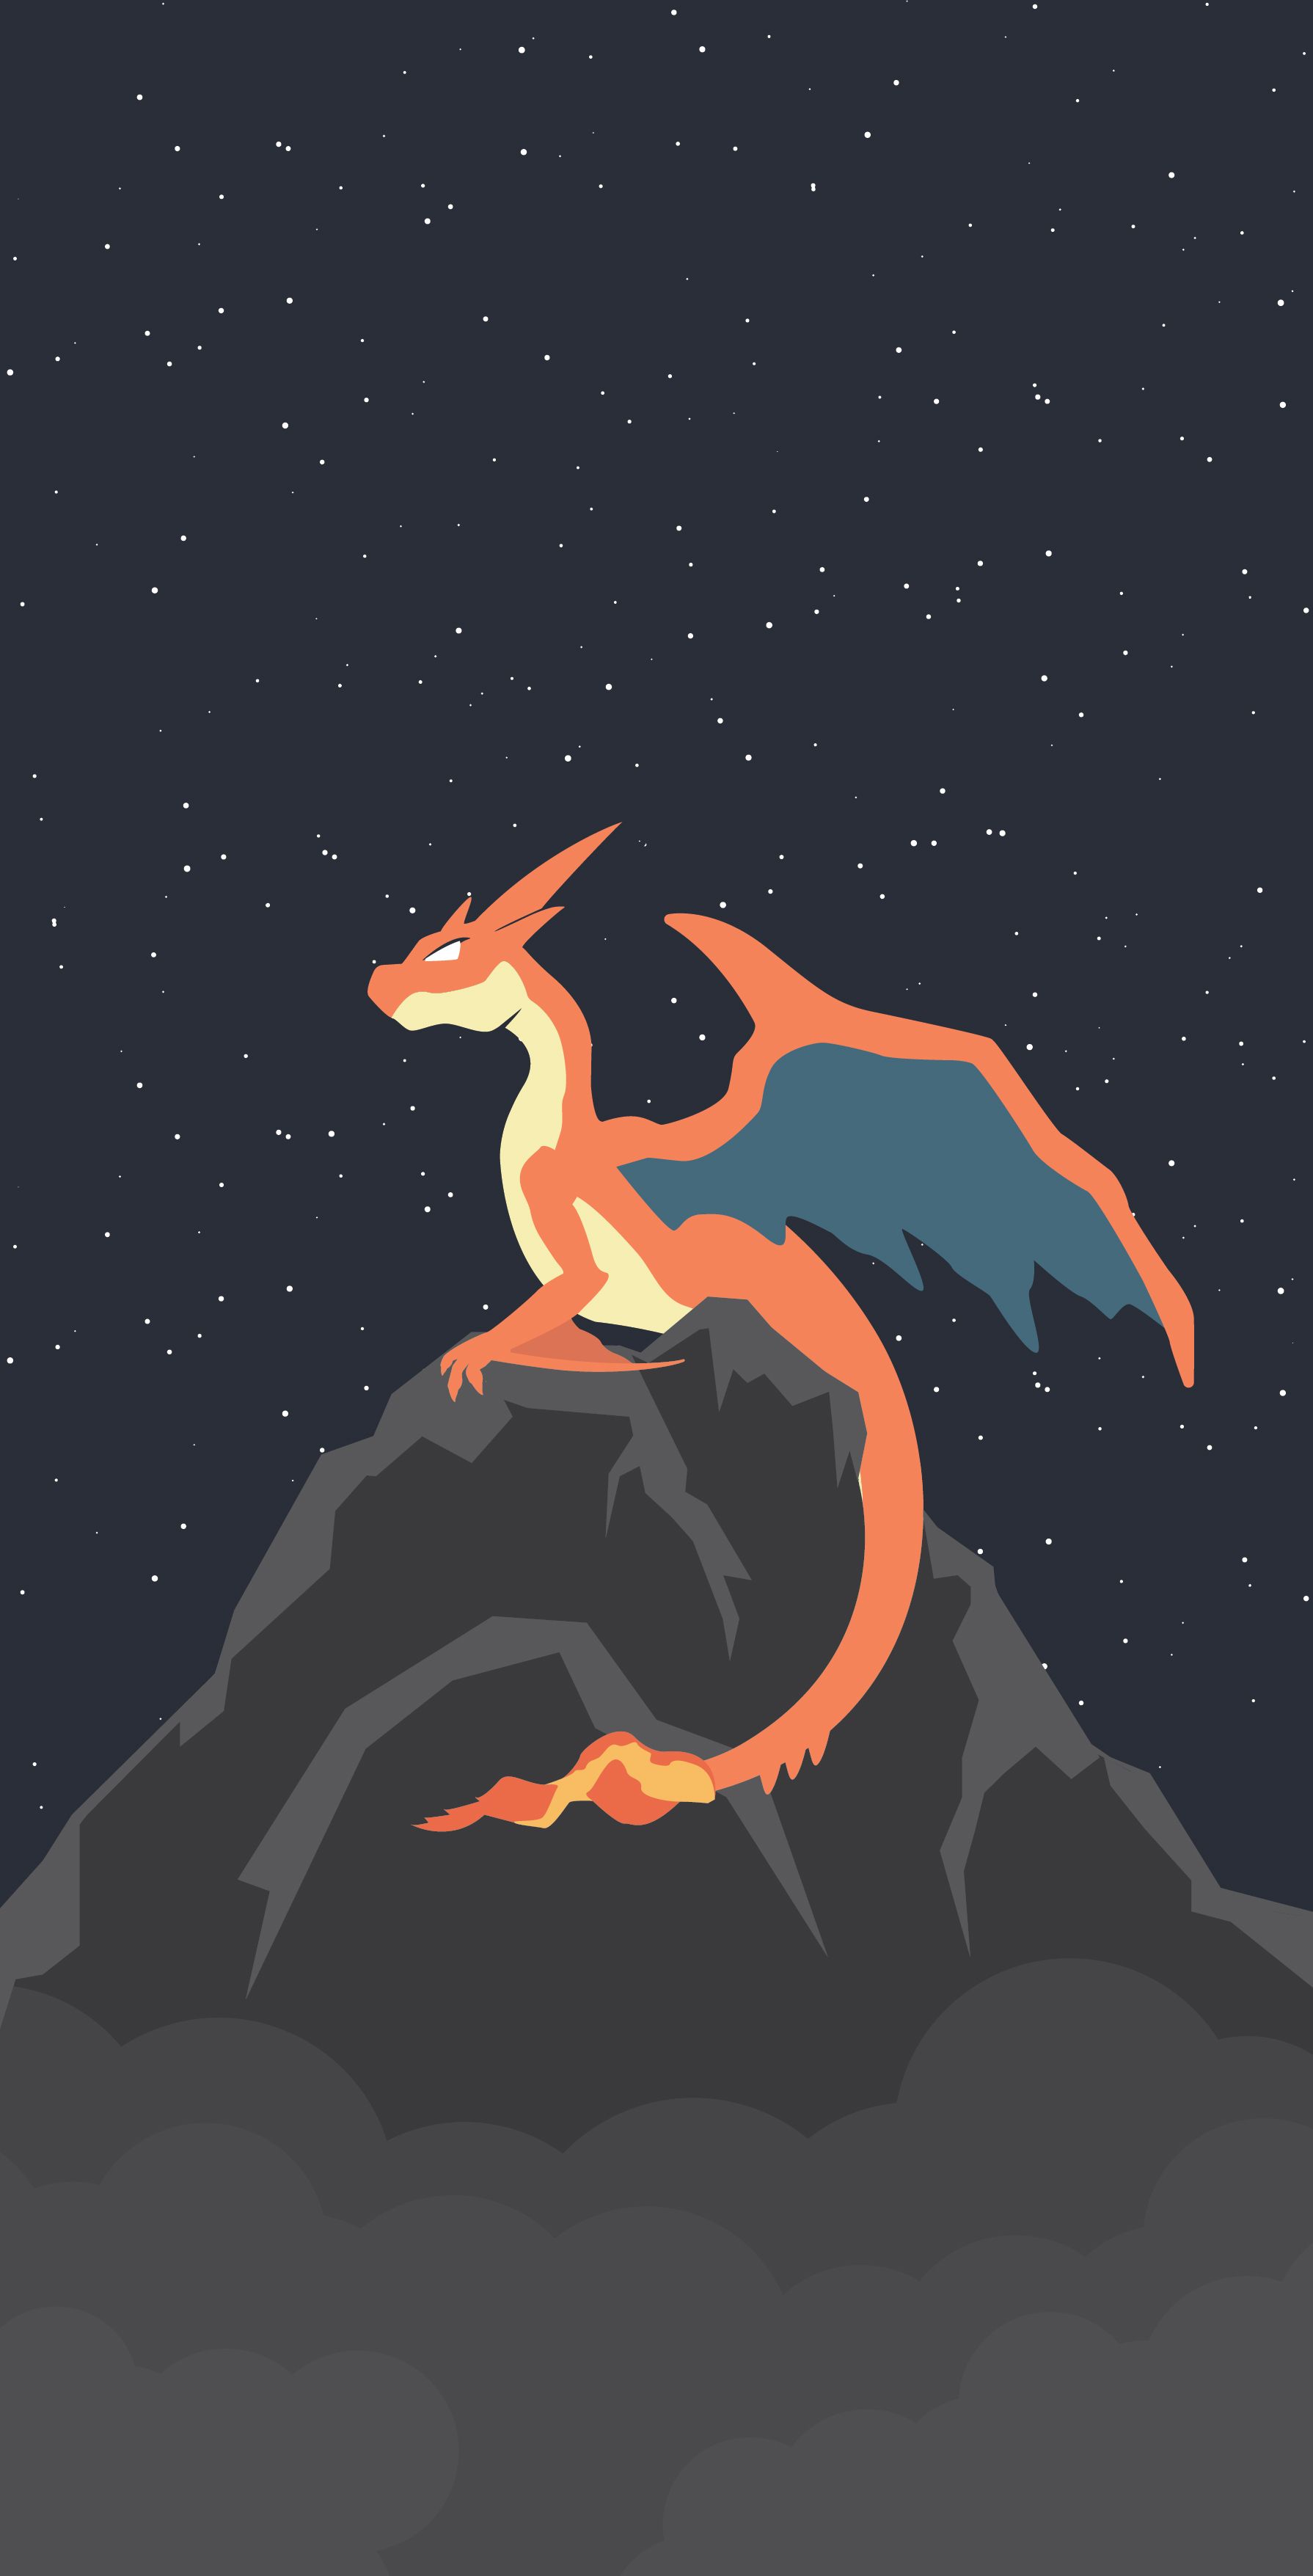 I made this Charizard Y wallpaper in Adobe Illustrator for a